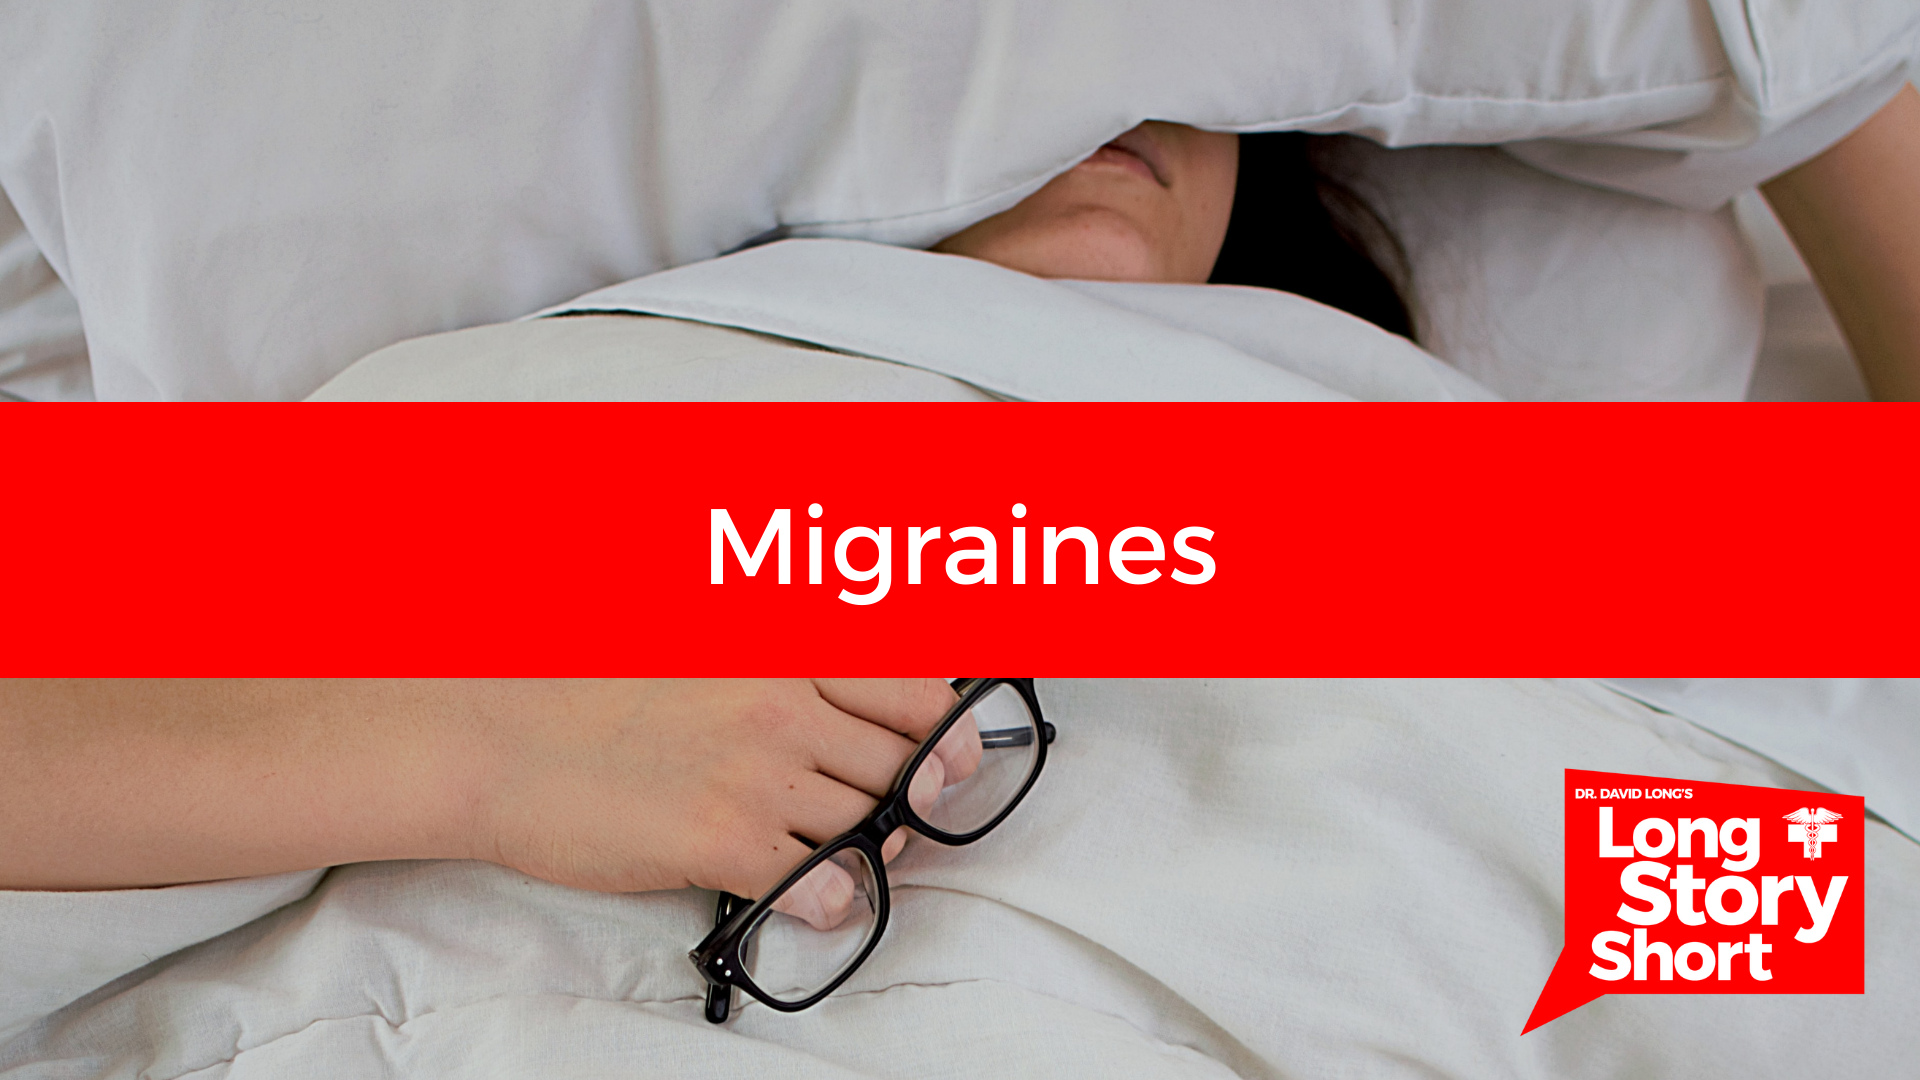 You are currently viewing Migraines – Dr. David Long